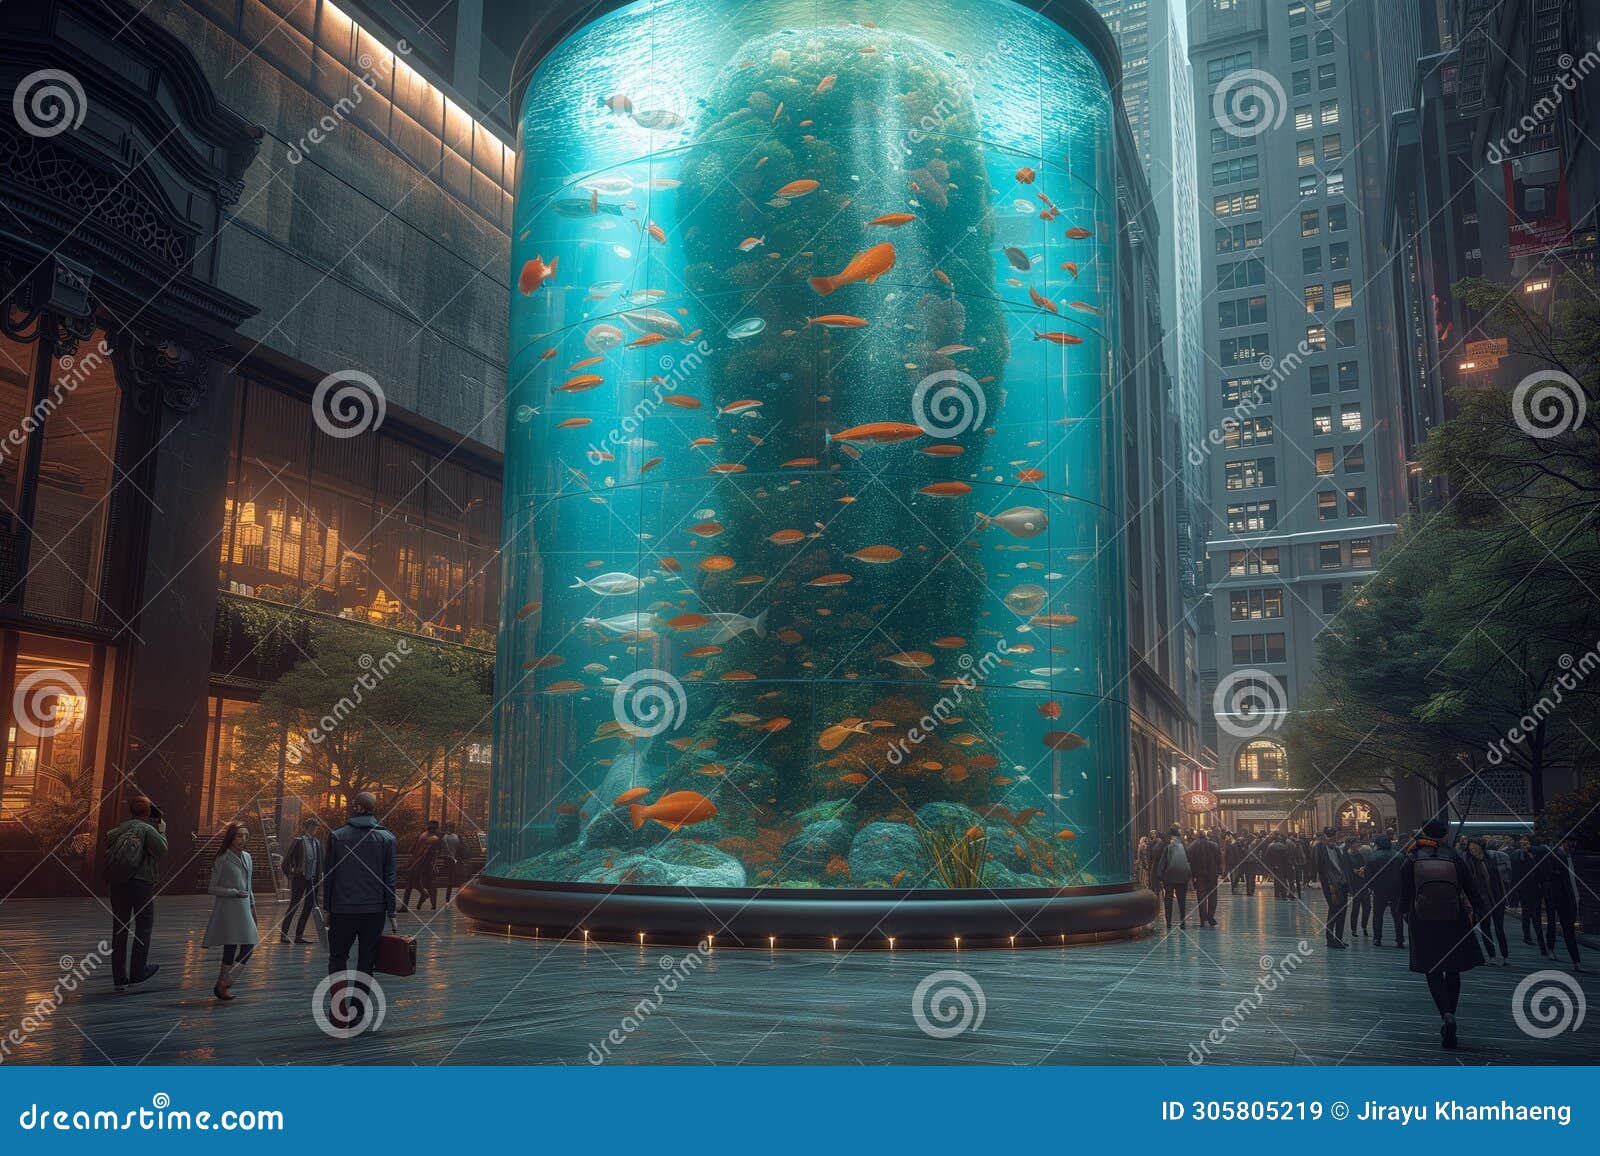 A Giant Fish Tank Shaped Like a Tower in the Middle of New York City Stock  Illustration - Illustration of beautiful, fantasy: 305805219